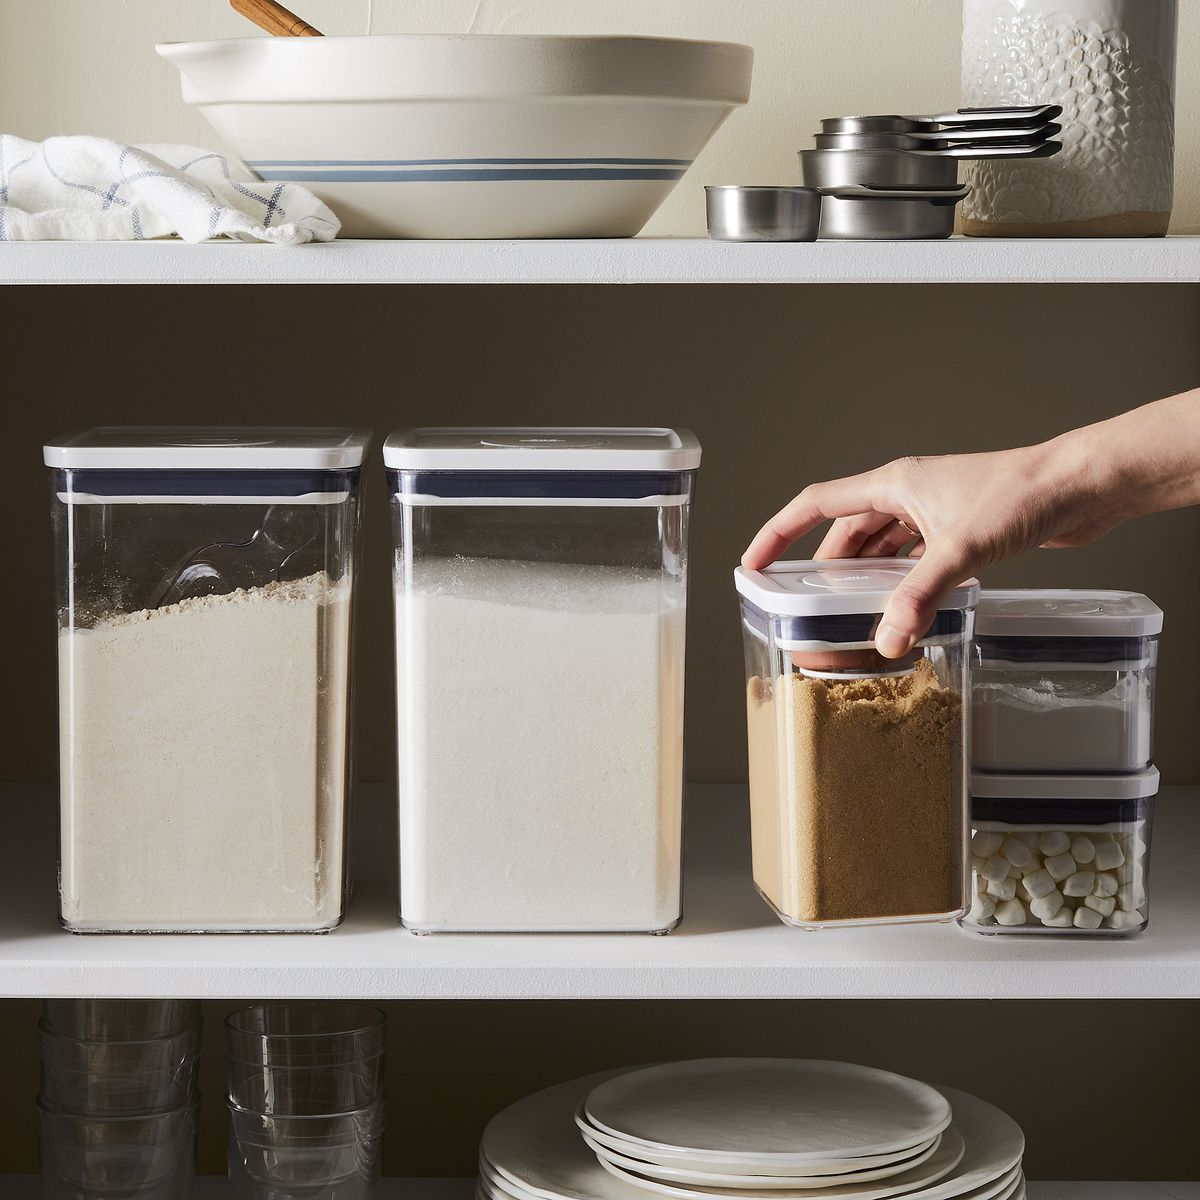 Best Tips for Storing Baking Supplies - How to Store Baking Supplies